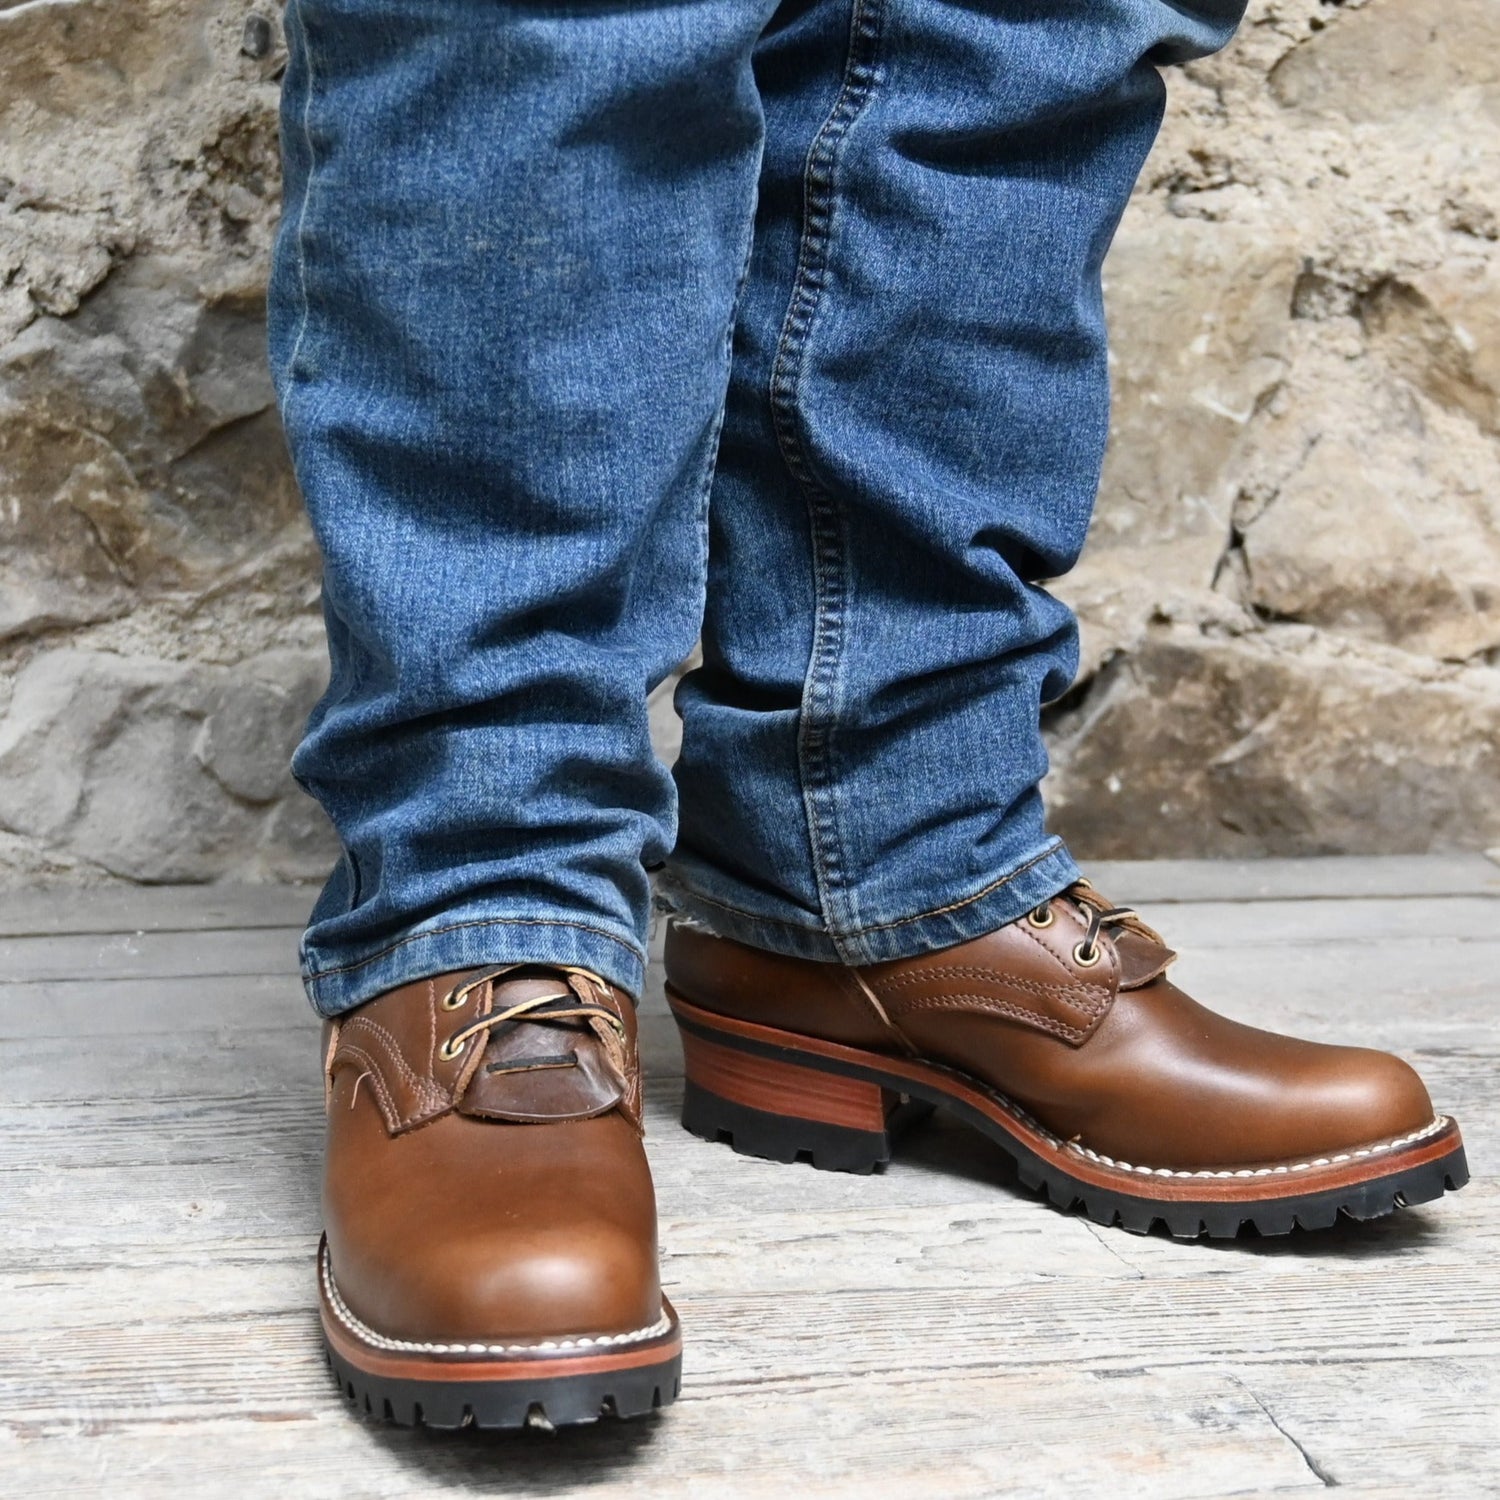 Nicks Urban Logger in British Tan view of front and side of boot on model size 10.5